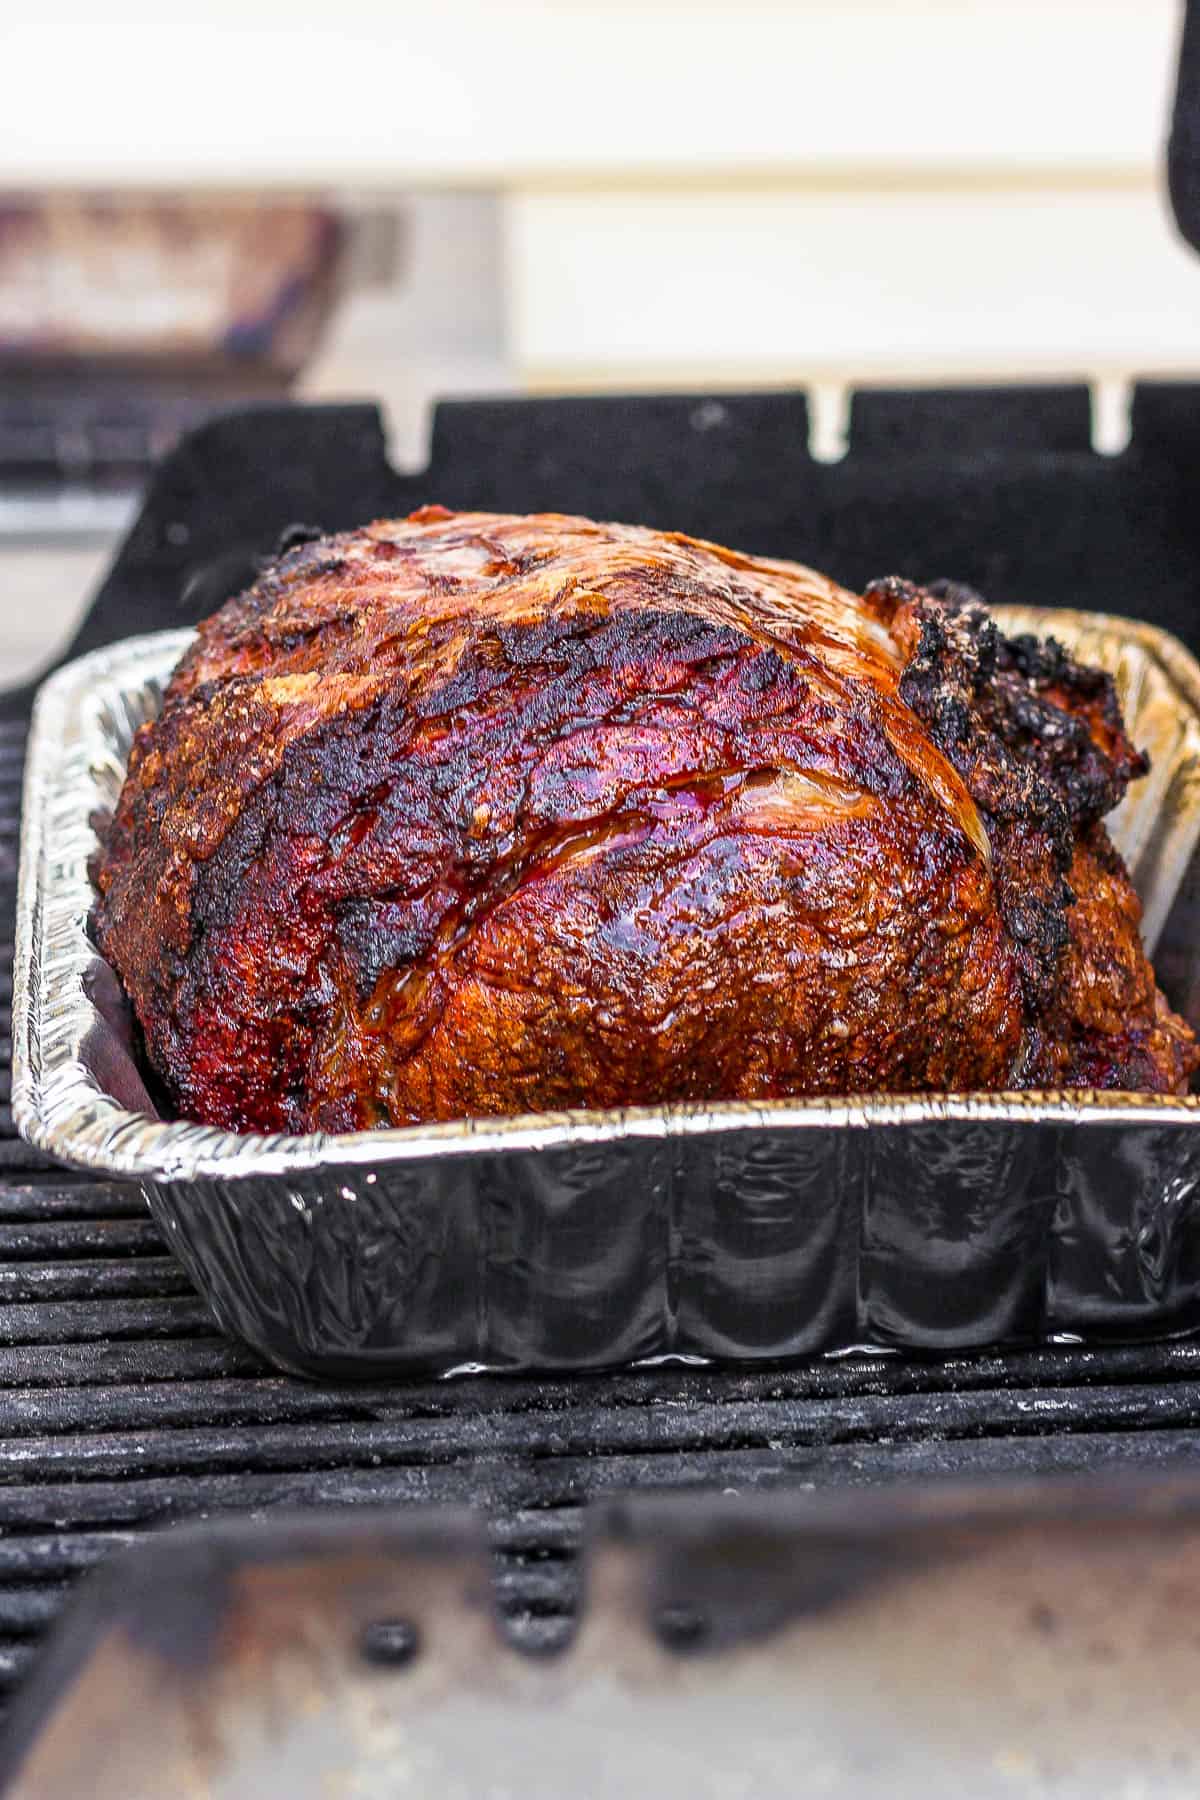 A fully cooked prime rib on the grill.